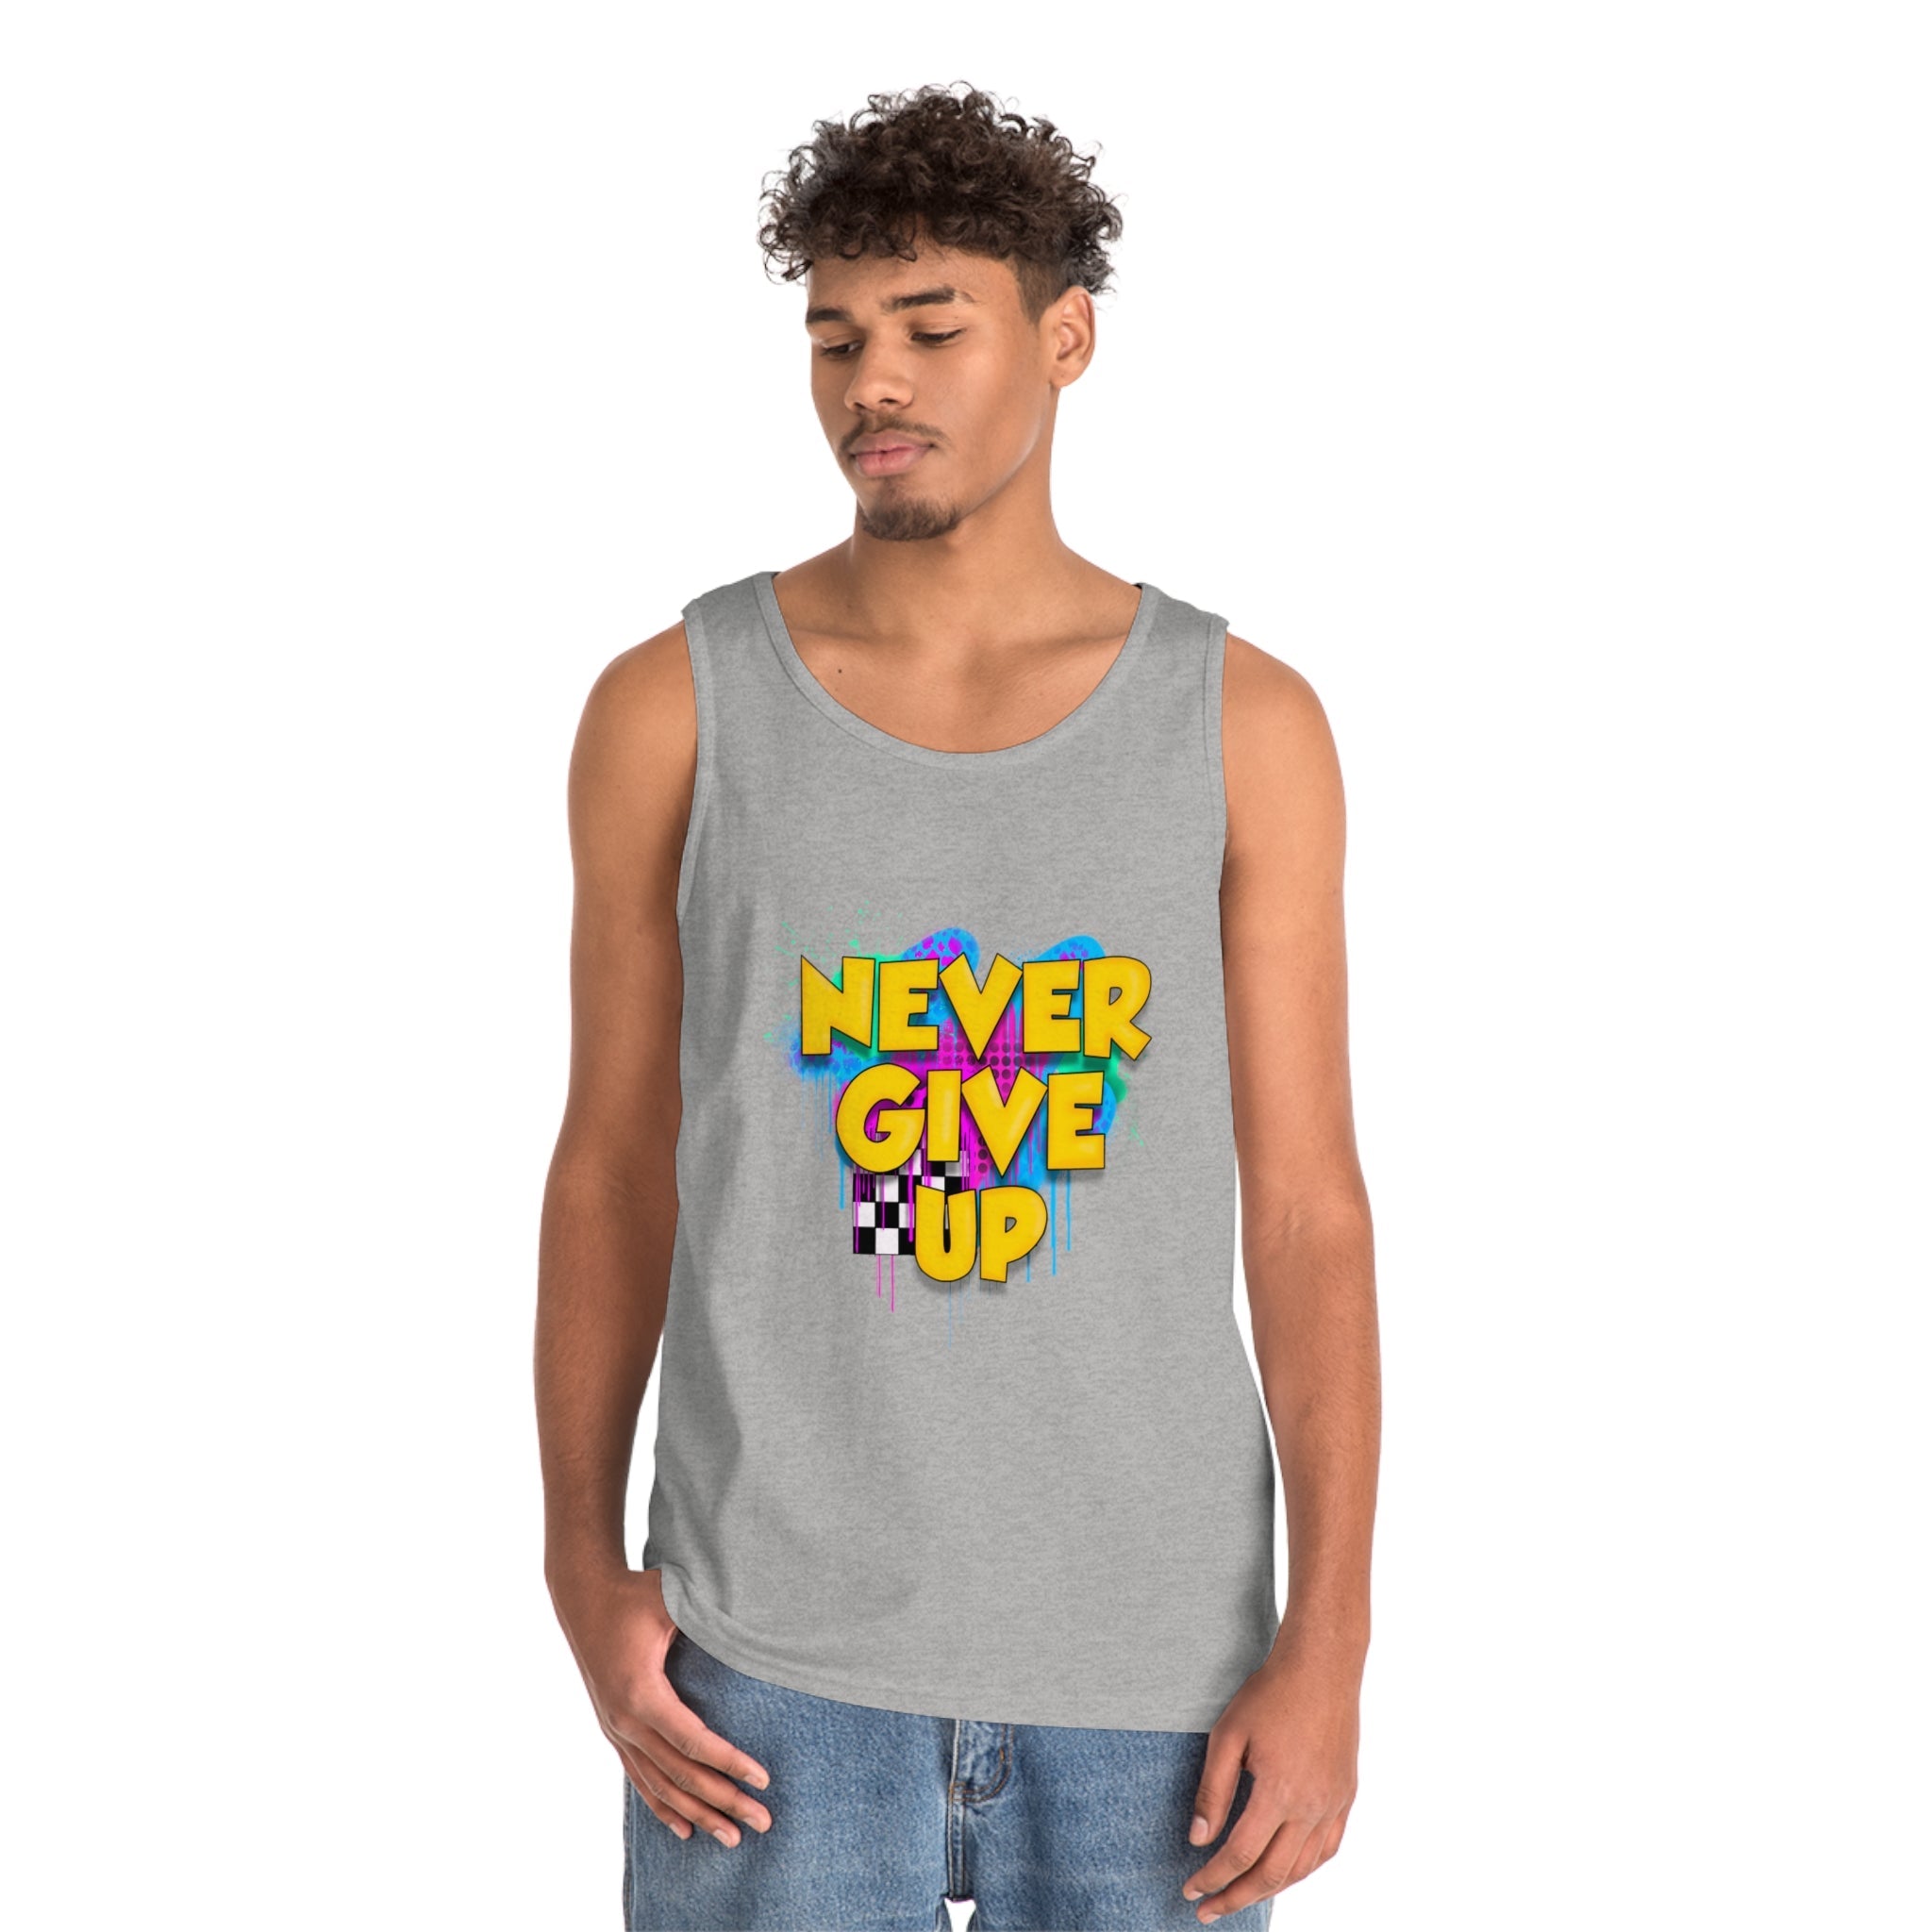 NEVER GIVE UP Tank Top - Sean Keith Art